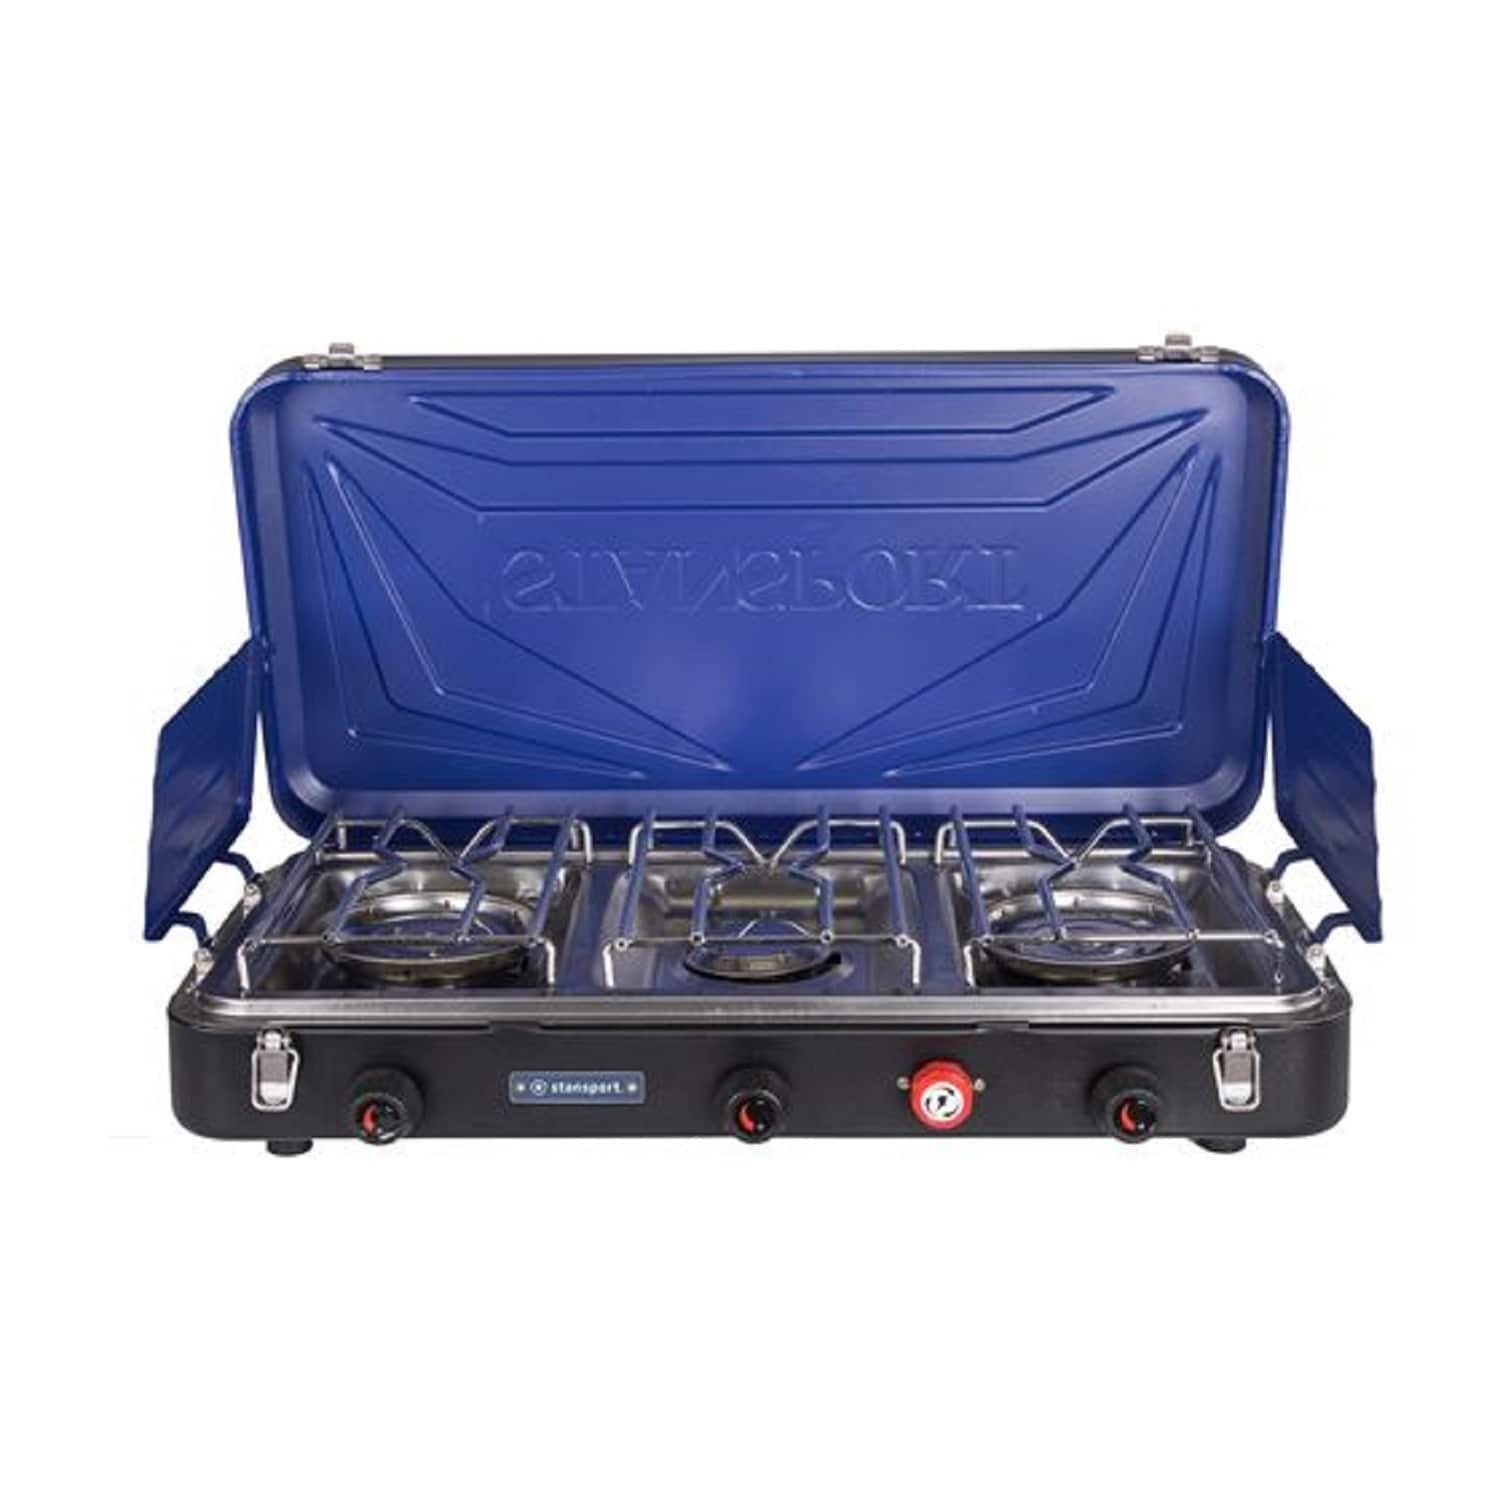 Best Place To buy Stansport 3-Burner Propane Stove - Blue - 12.75" L x 23" W x 4.3" H